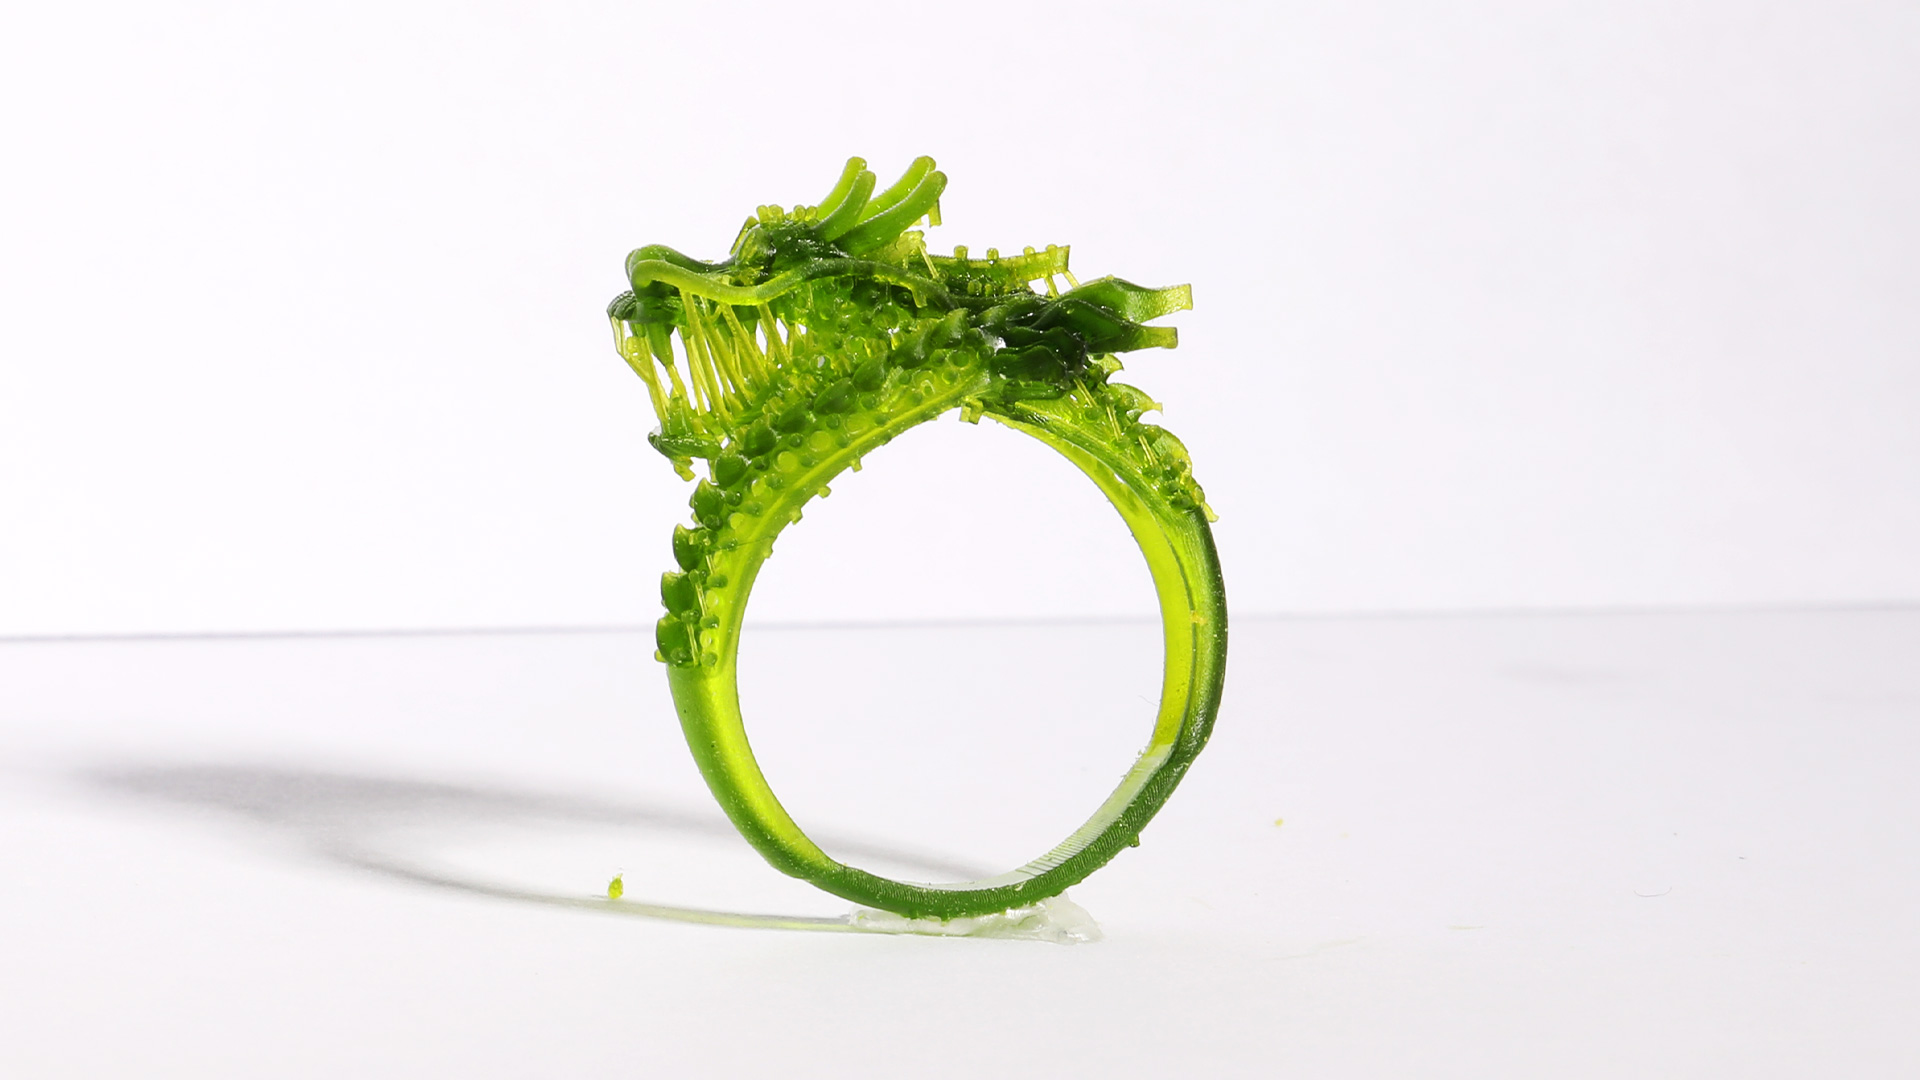 Can 3D Printed Jewelry Be Used Directly?